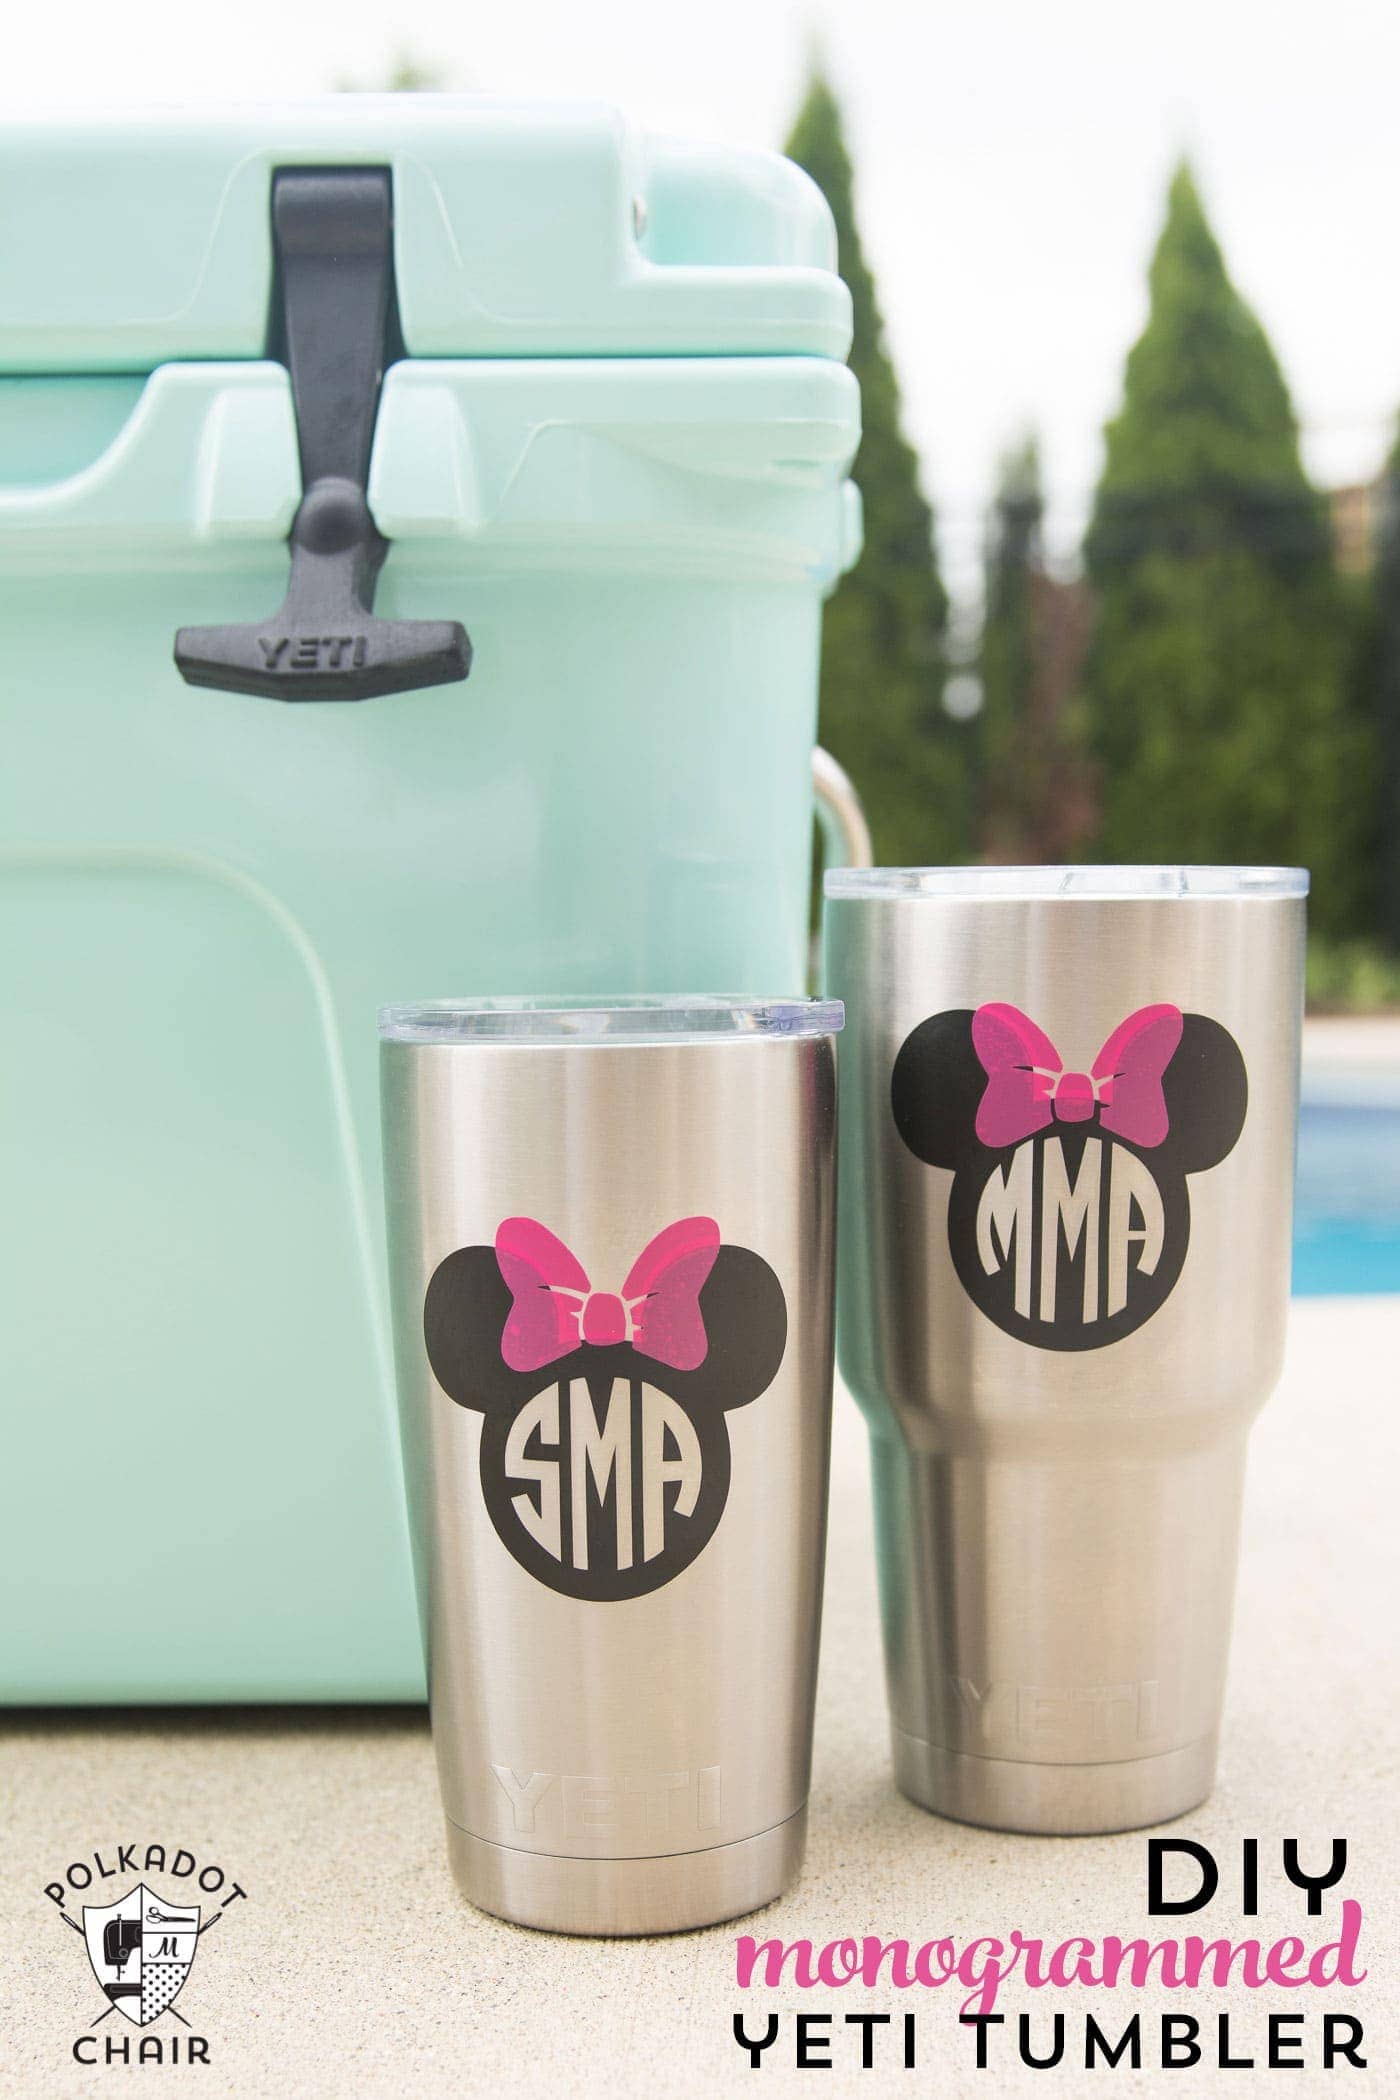 Storyboard idea  Tumbler cups personalized, Yeti cup designs, Tumbler cups  diy